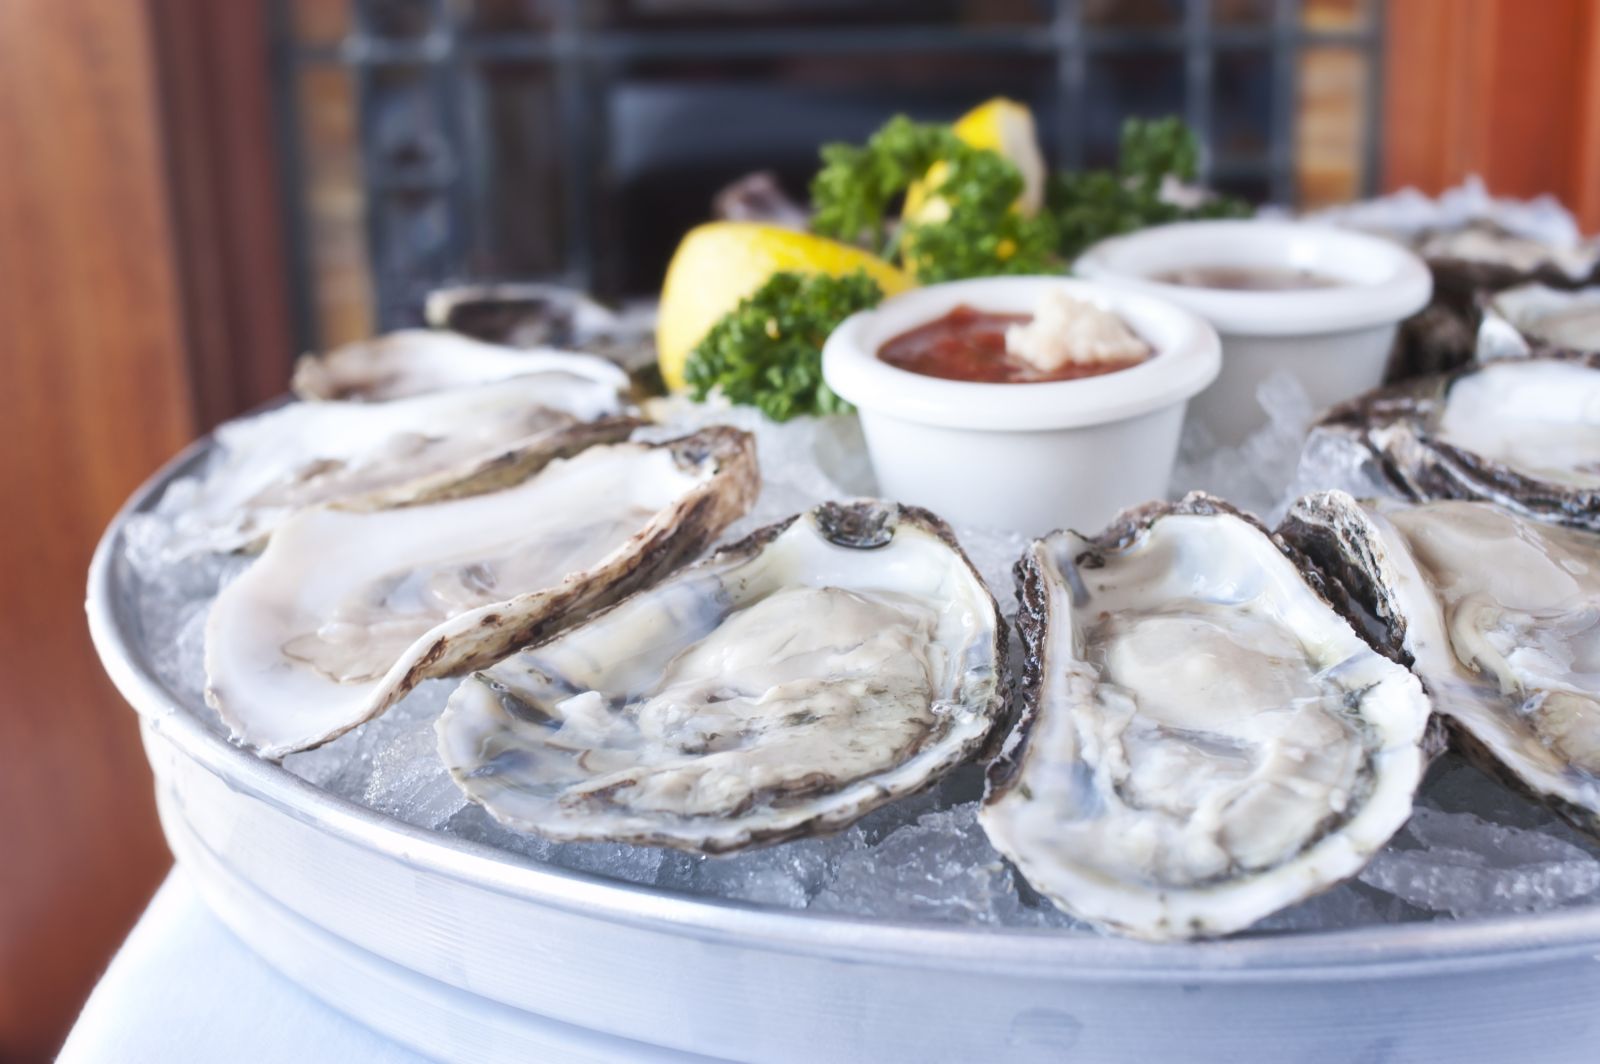 Enjoy raw oysters at this Surfside Beach restaurant.